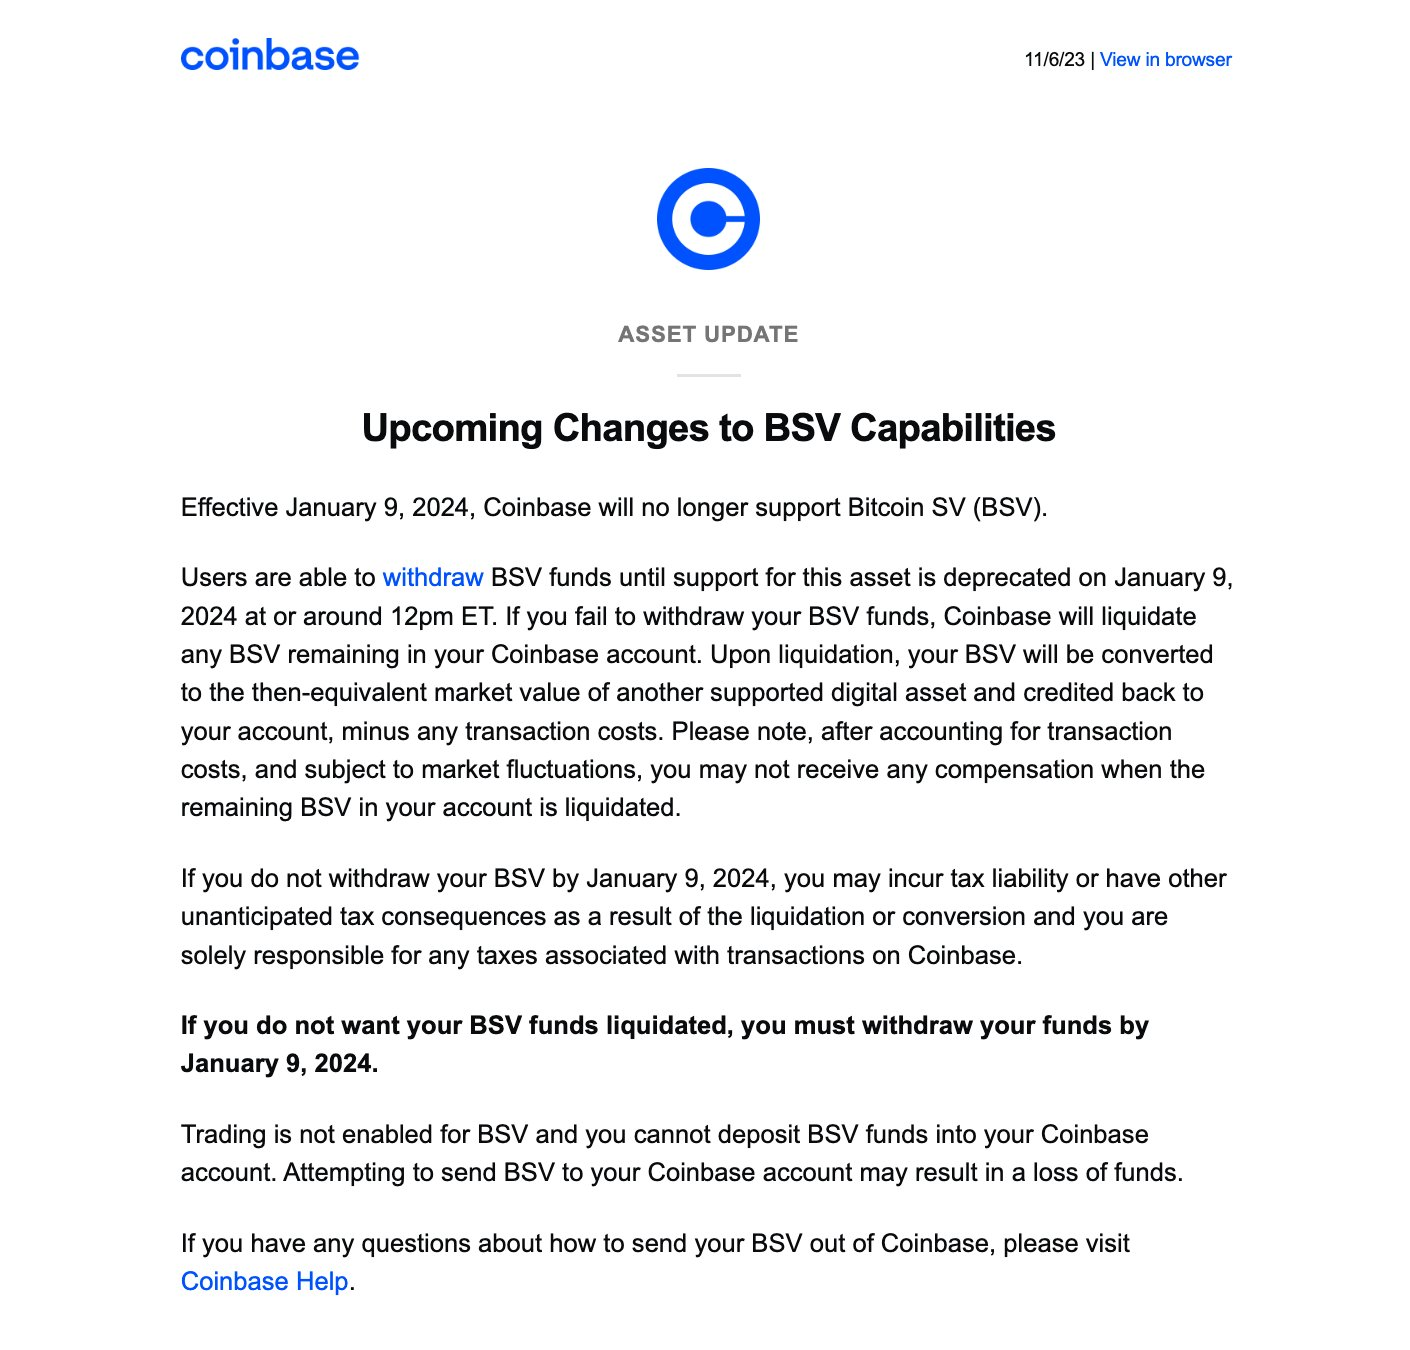 Source: Email from Coinbase